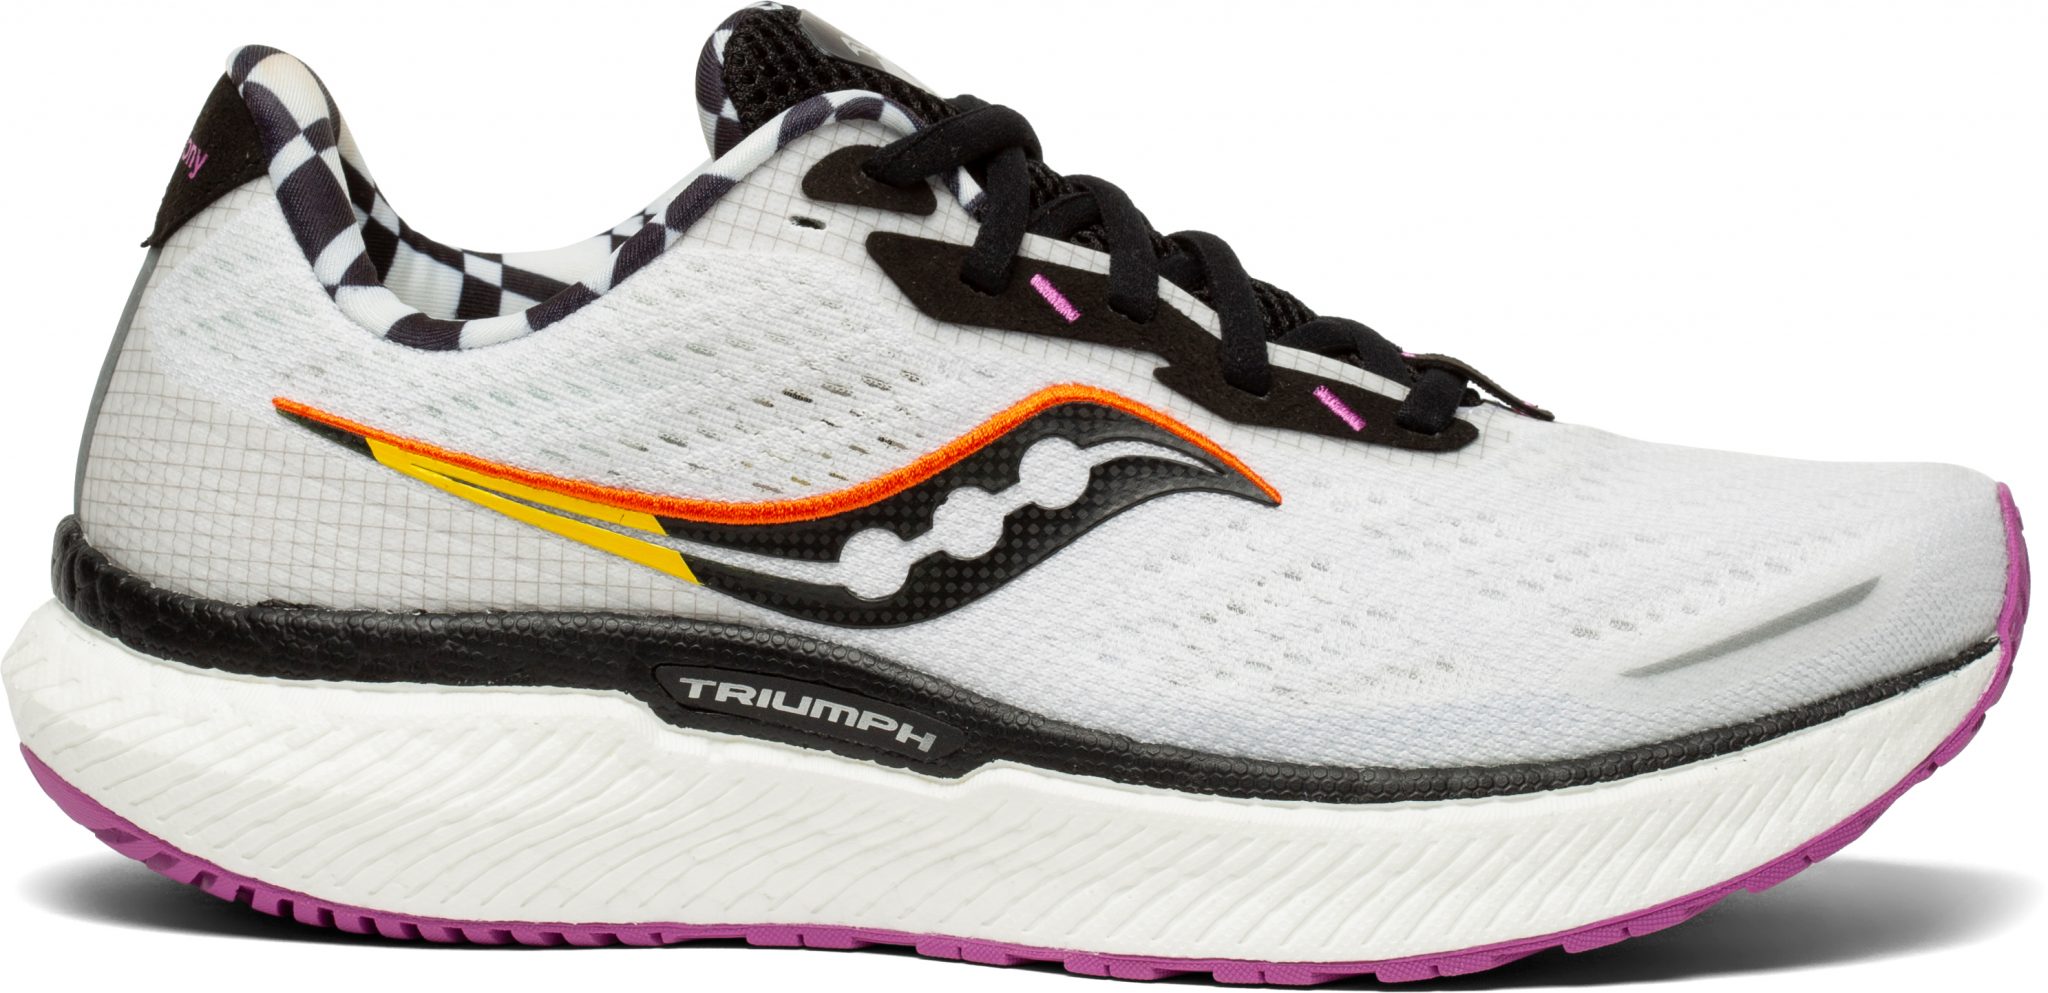 Saucony Launches The New Triumph 19 | SGB Media Online